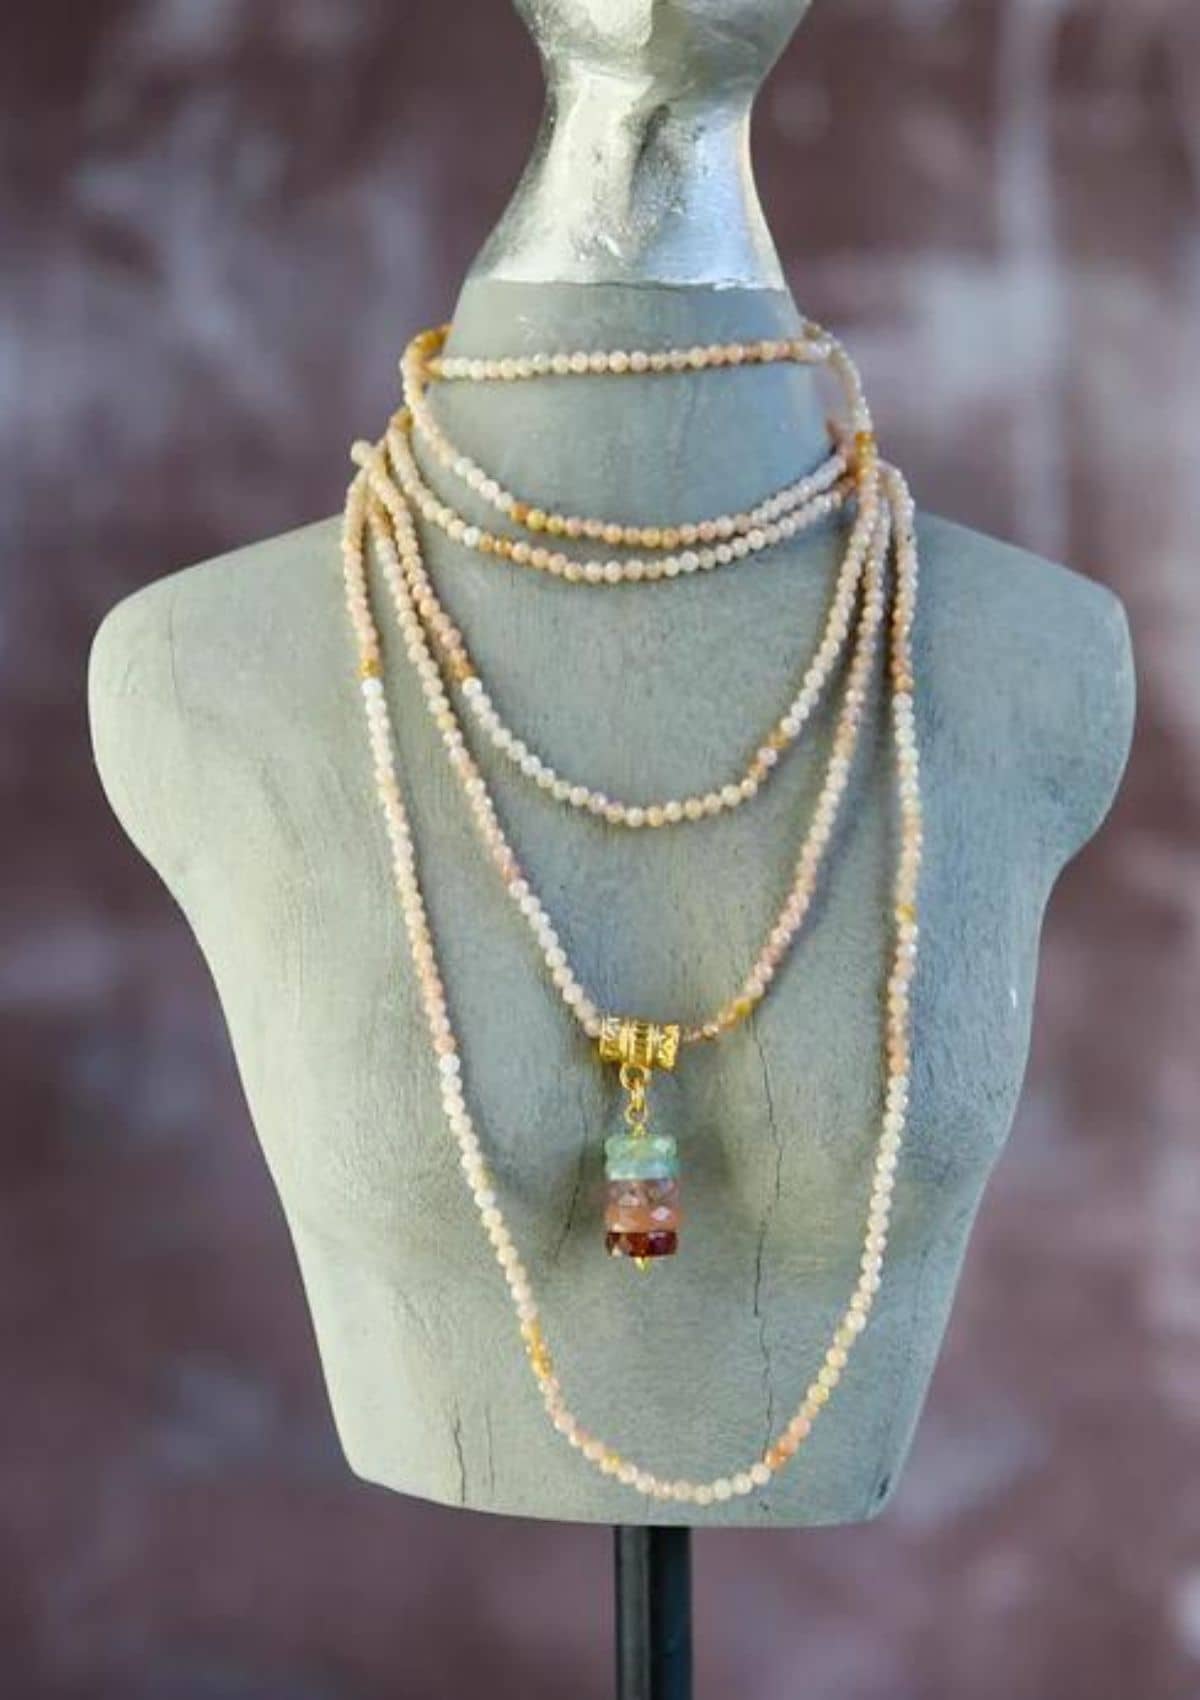 Aramis Beaded Layering Necklace - White Opal -Catherine Page- Ruby Jane-